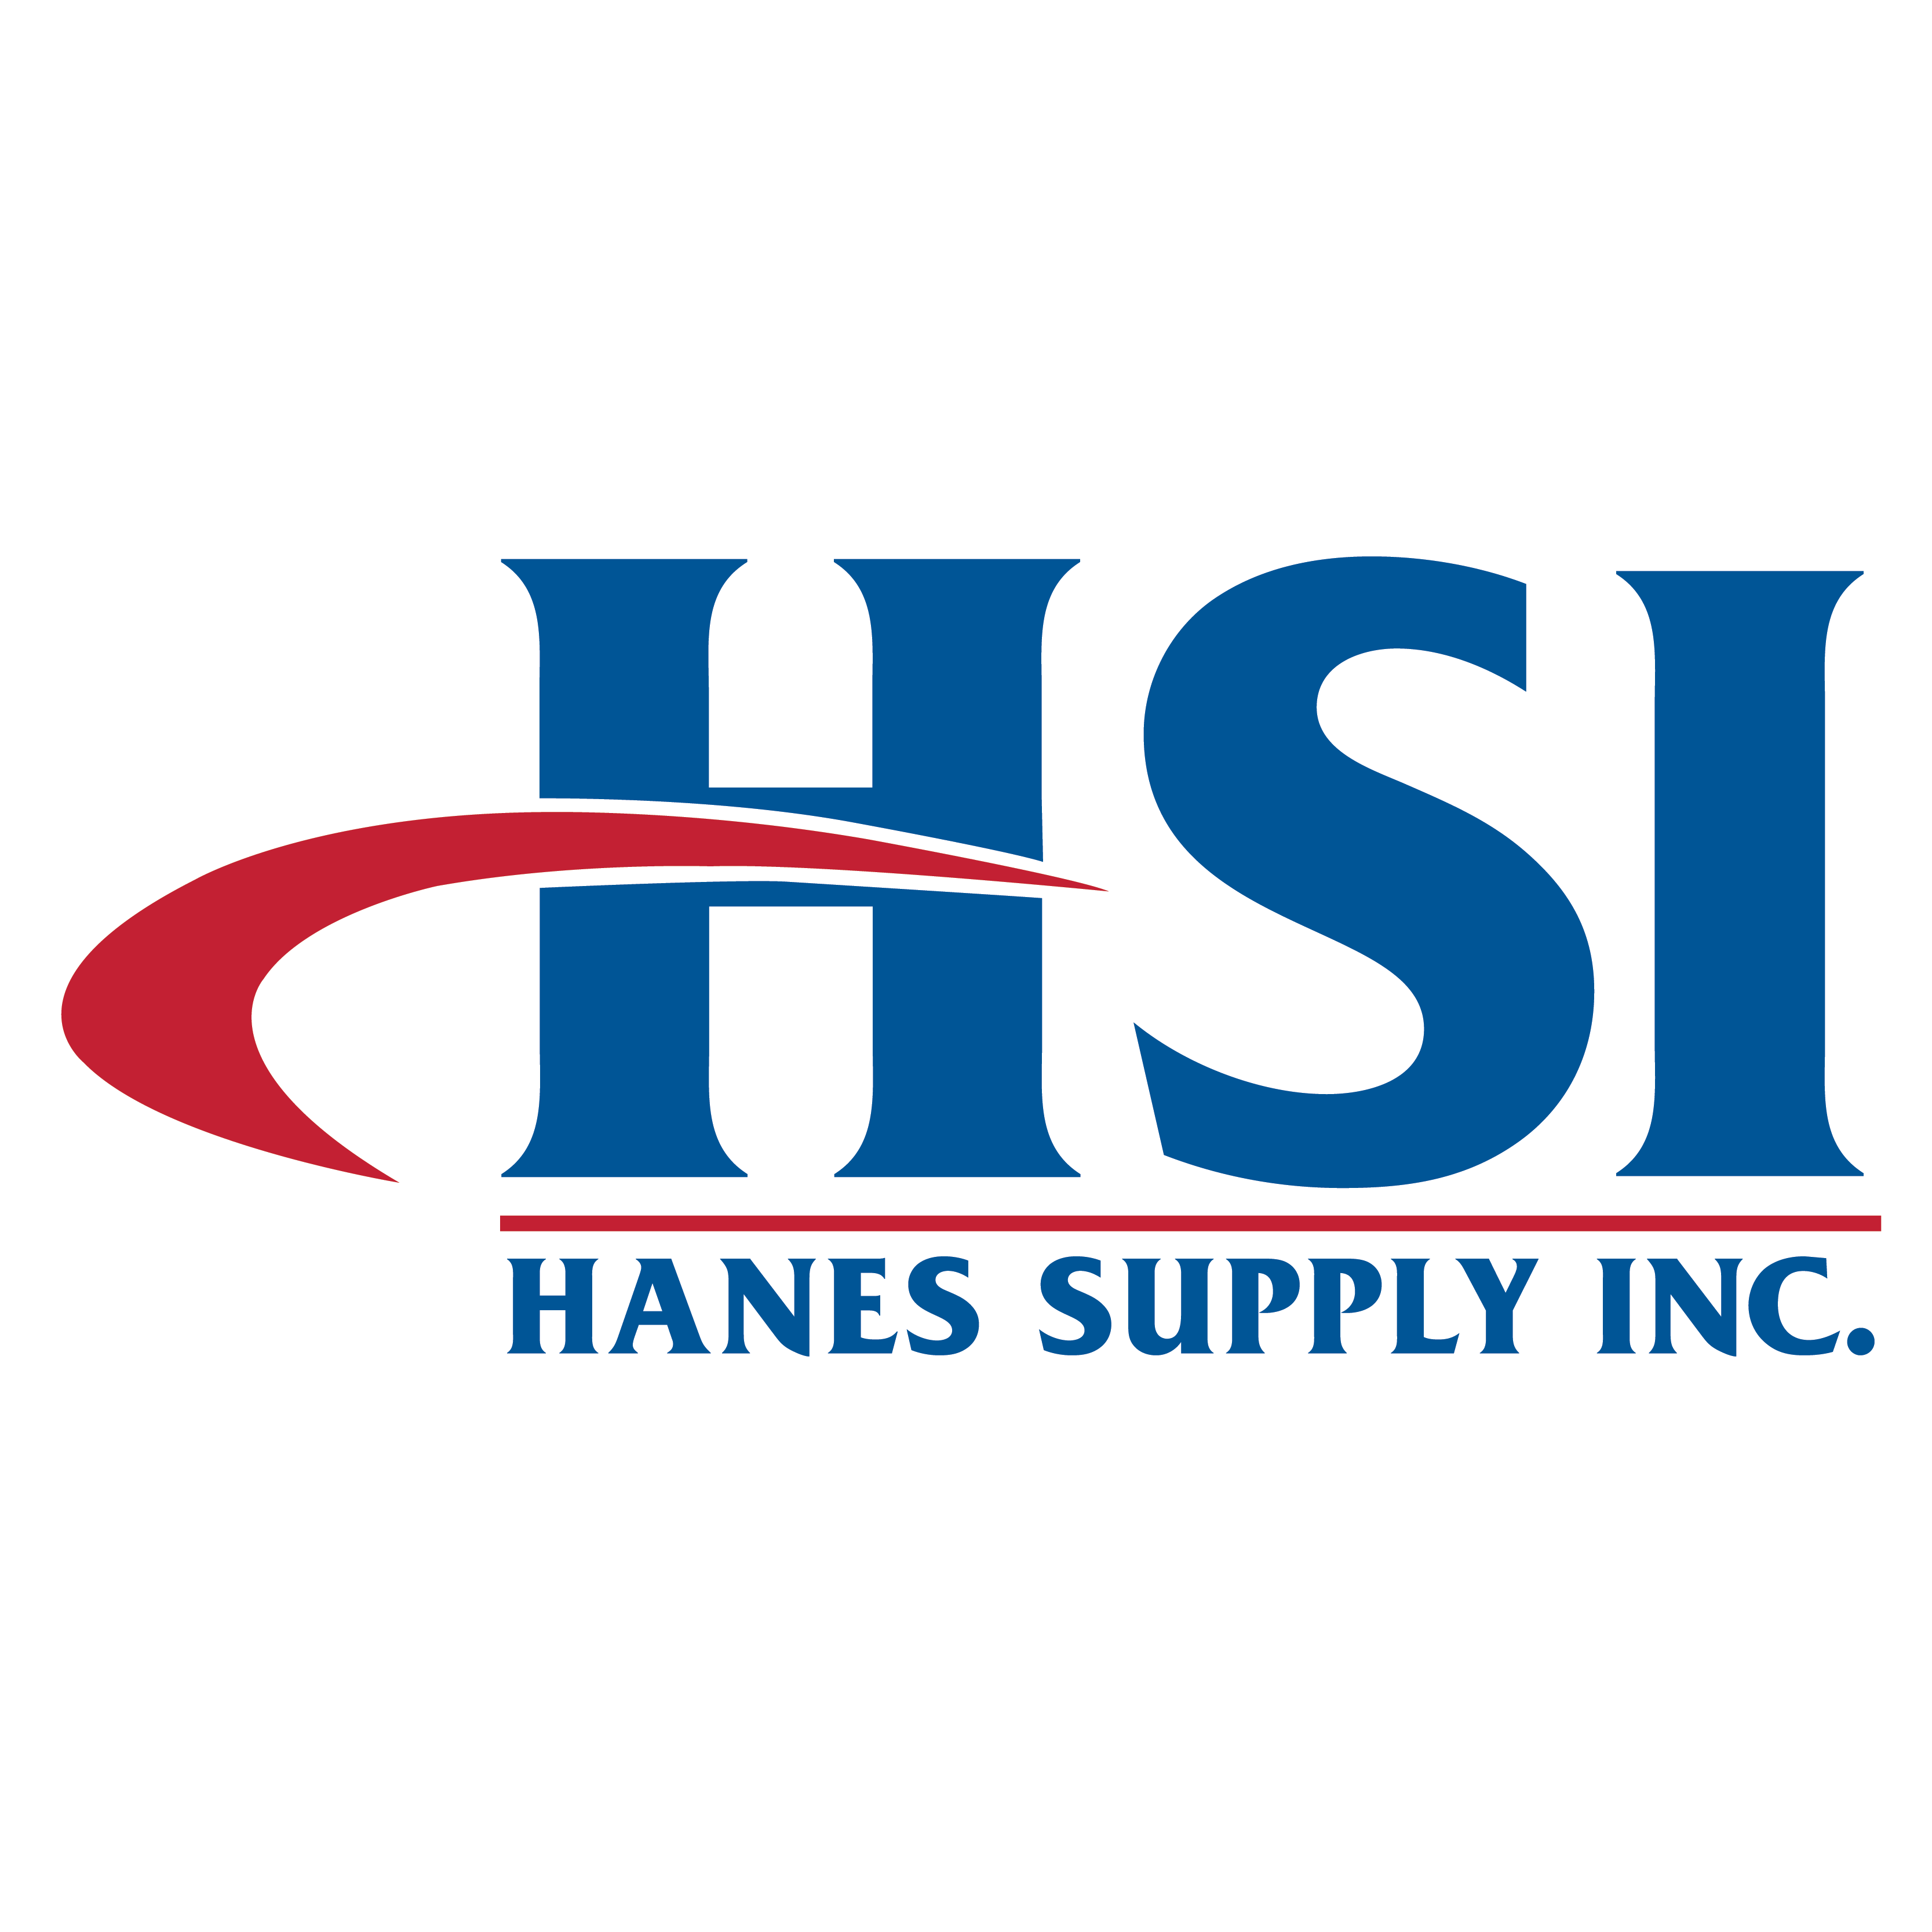 hanes supply, inc ISO 9001:2015 registration certificate